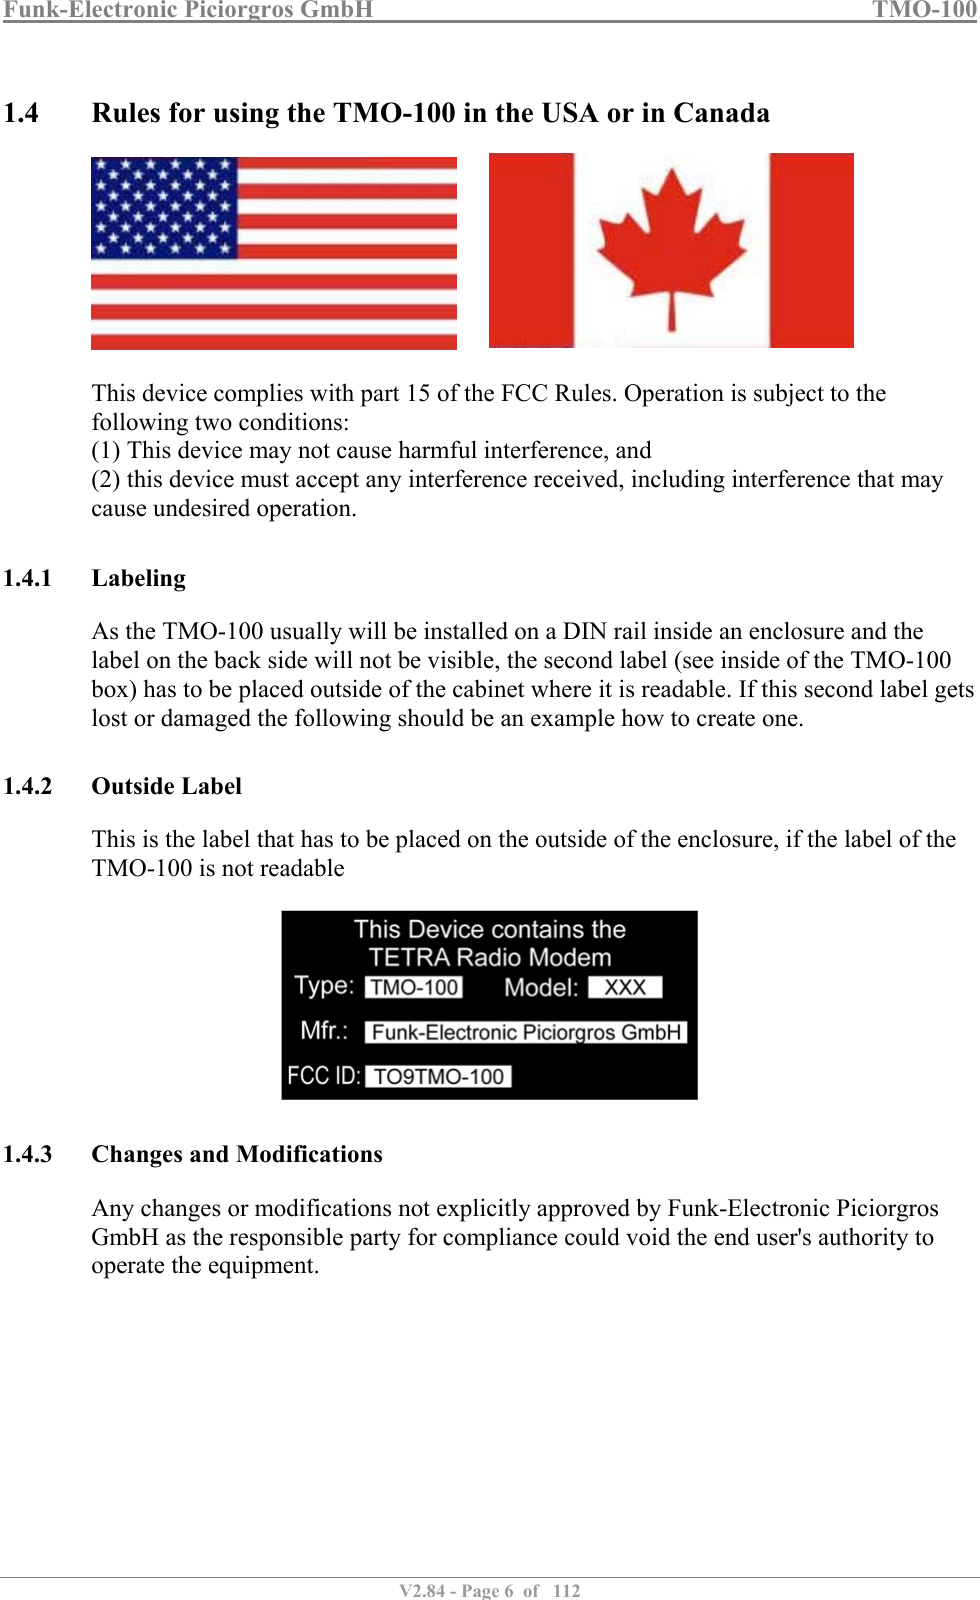 Funk-Electronic Piciorgros GmbH   TMO-100   V2.84 - Page 6  of   112   1.4 Rules for using the TMO-100 in the USA or in Canada          This device complies with part 15 of the FCC Rules. Operation is subject to the following two conditions:  (1) This device may not cause harmful interference, and  (2) this device must accept any interference received, including interference that may cause undesired operation.   1.4.1 Labeling As the TMO-100 usually will be installed on a DIN rail inside an enclosure and the label on the back side will not be visible, the second label (see inside of the TMO-100 box) has to be placed outside of the cabinet where it is readable. If this second label gets lost or damaged the following should be an example how to create one.  1.4.2 Outside Label This is the label that has to be placed on the outside of the enclosure, if the label of the TMO-100 is not readable    1.4.3 Changes and Modifications Any changes or modifications not explicitly approved by Funk-Electronic Piciorgros GmbH as the responsible party for compliance could void the end user&apos;s authority to operate the equipment.           